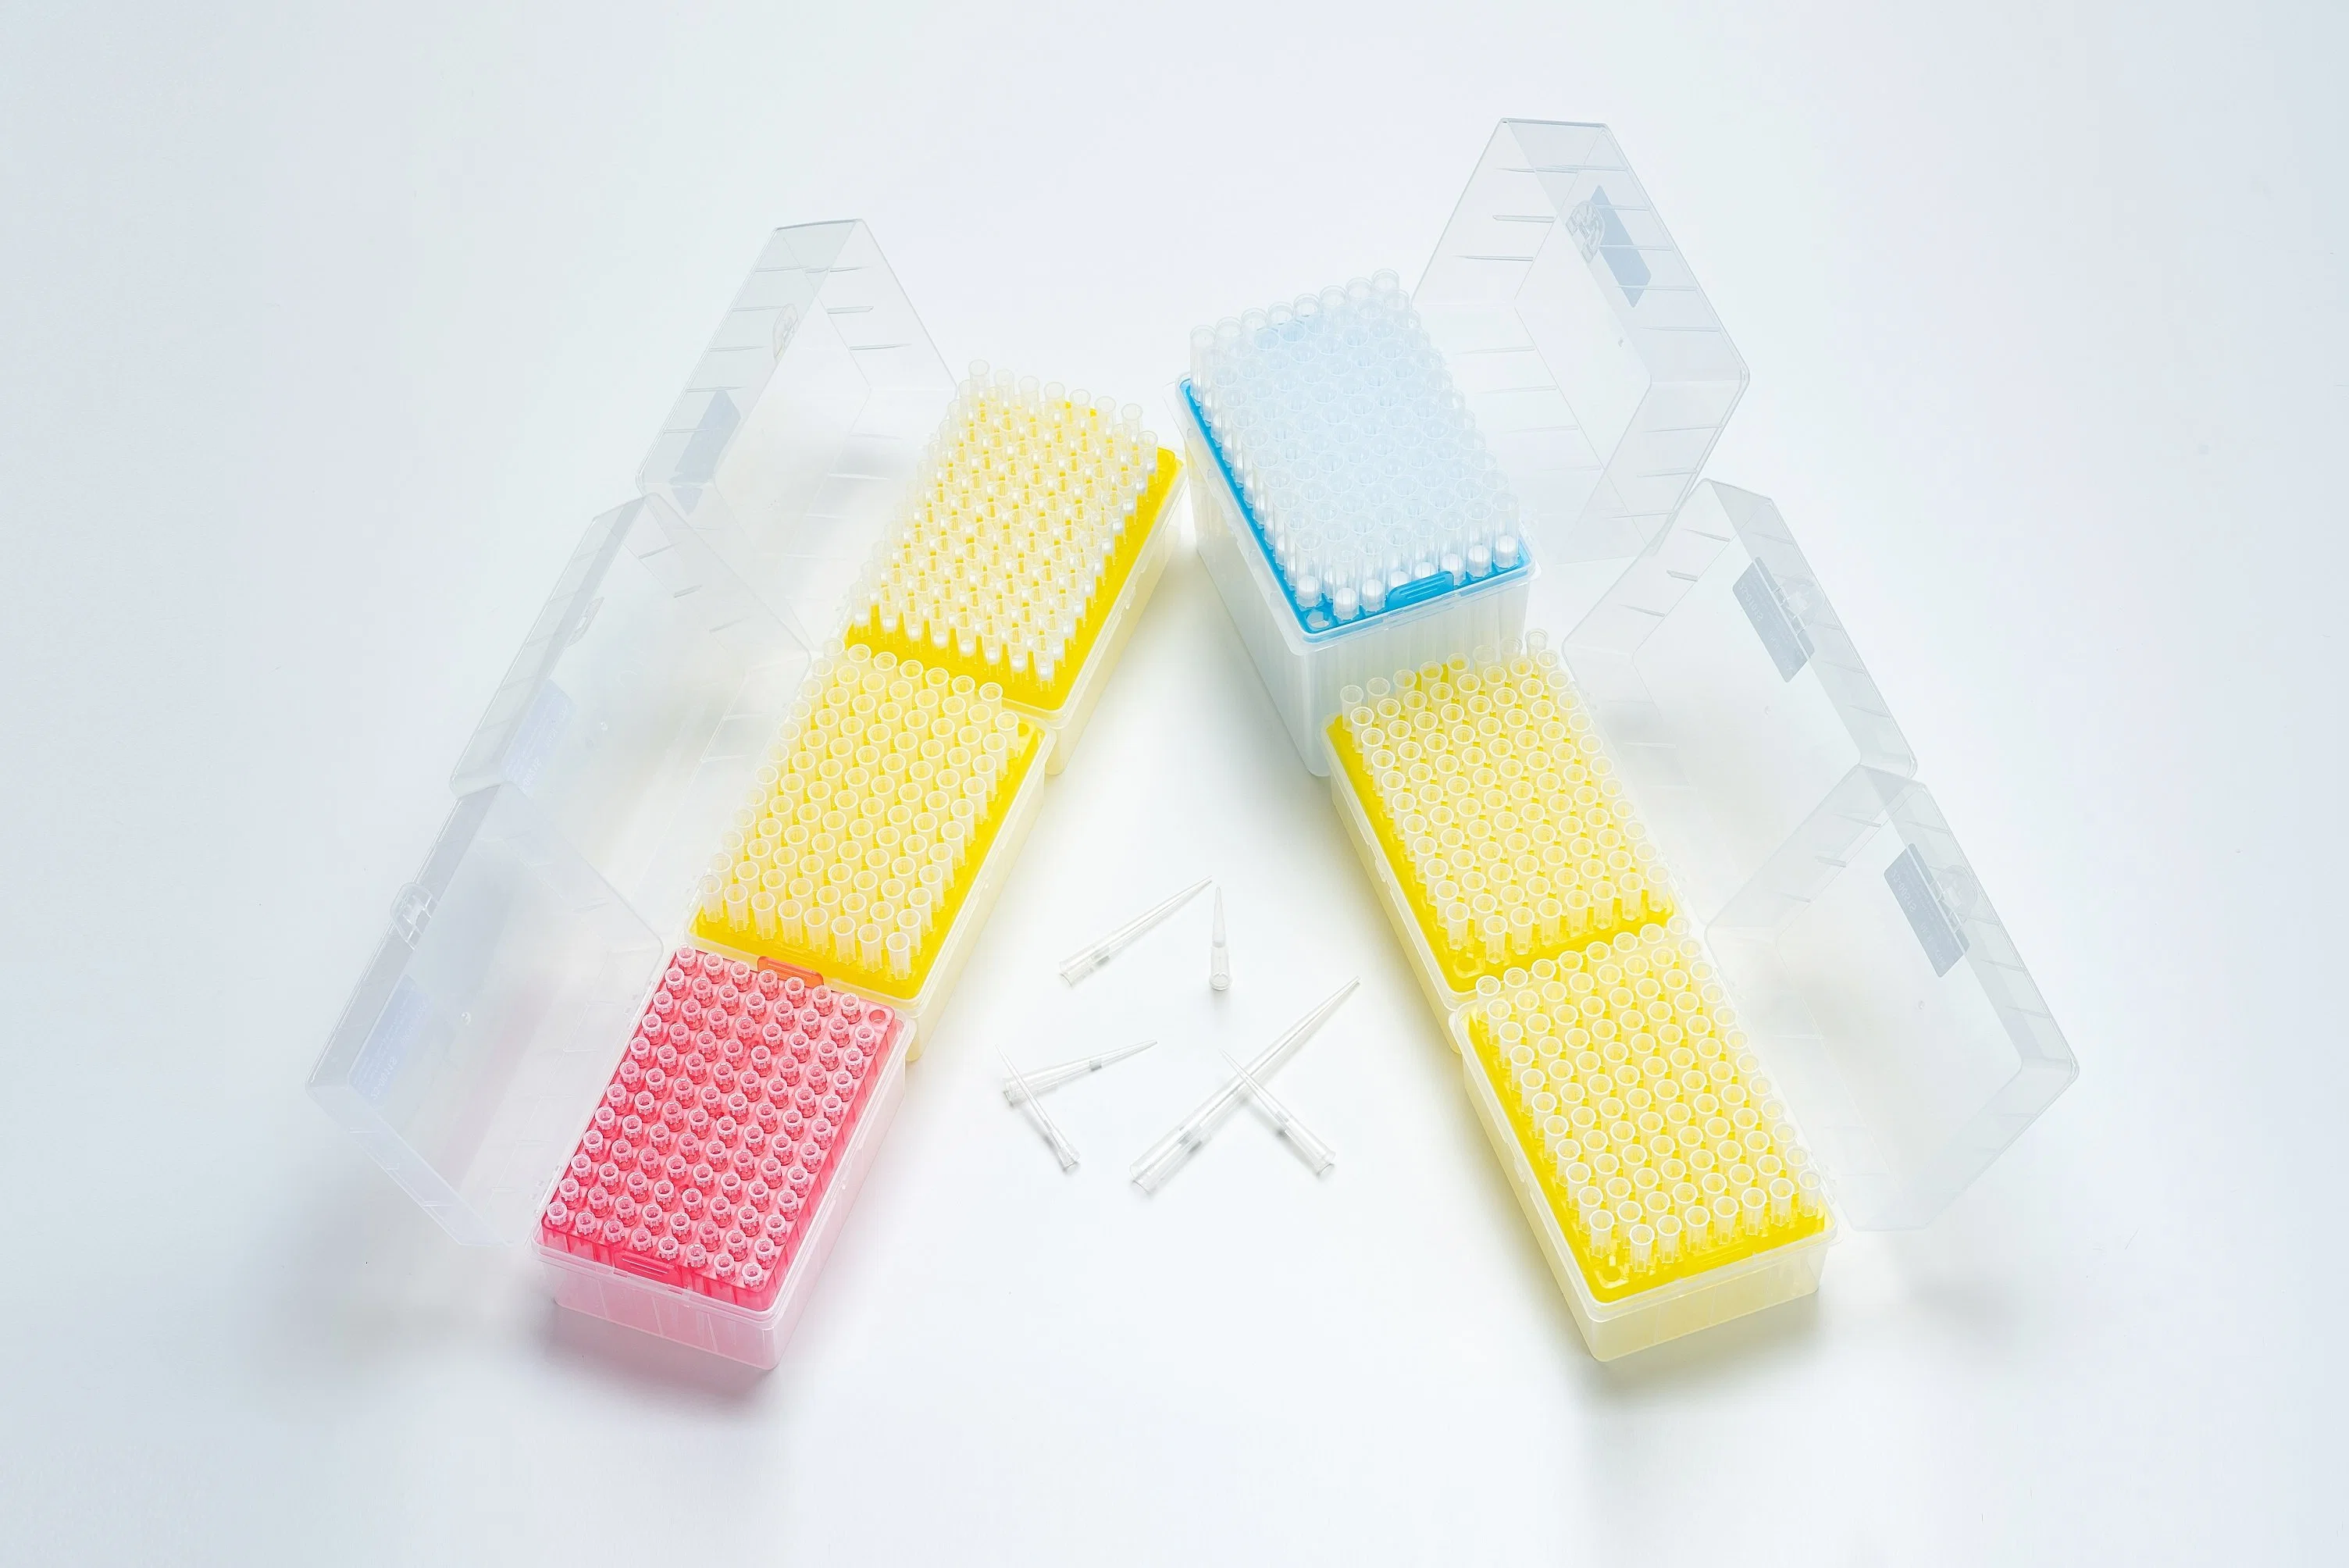 100UL Disposable Pipette Tip Disposable Medical Supplies Lab Pipette Tips With Filter